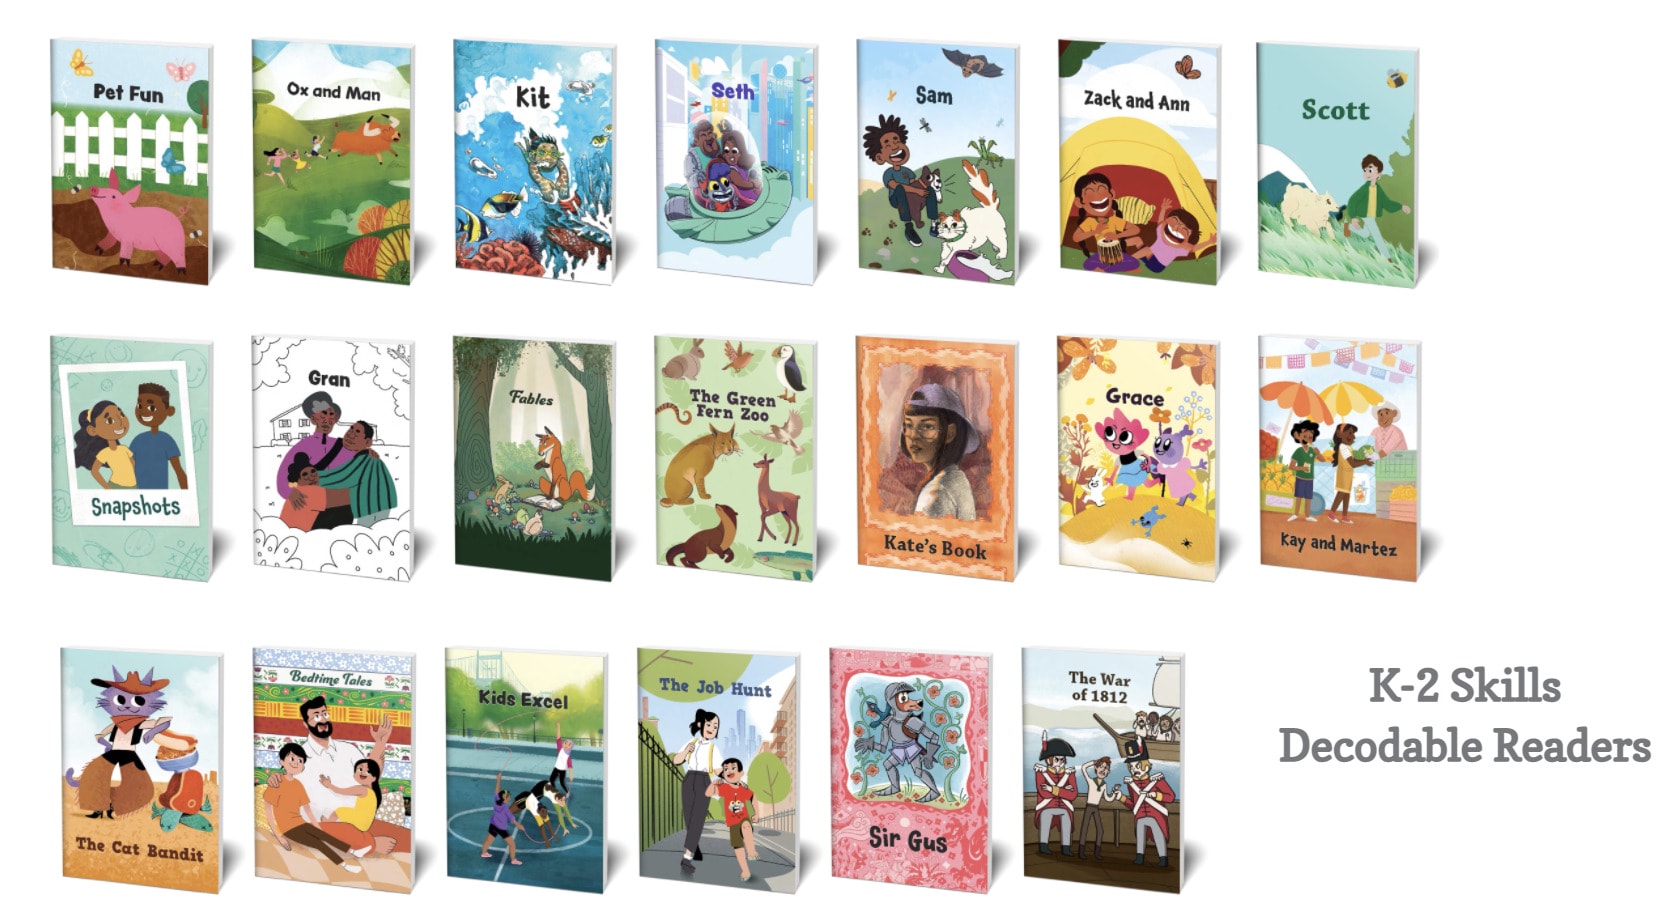 A collection of colorful Amplify CKLA K-2 skills decodable readers book covers featuring various whimsical illustrations of children and animals in different settings.